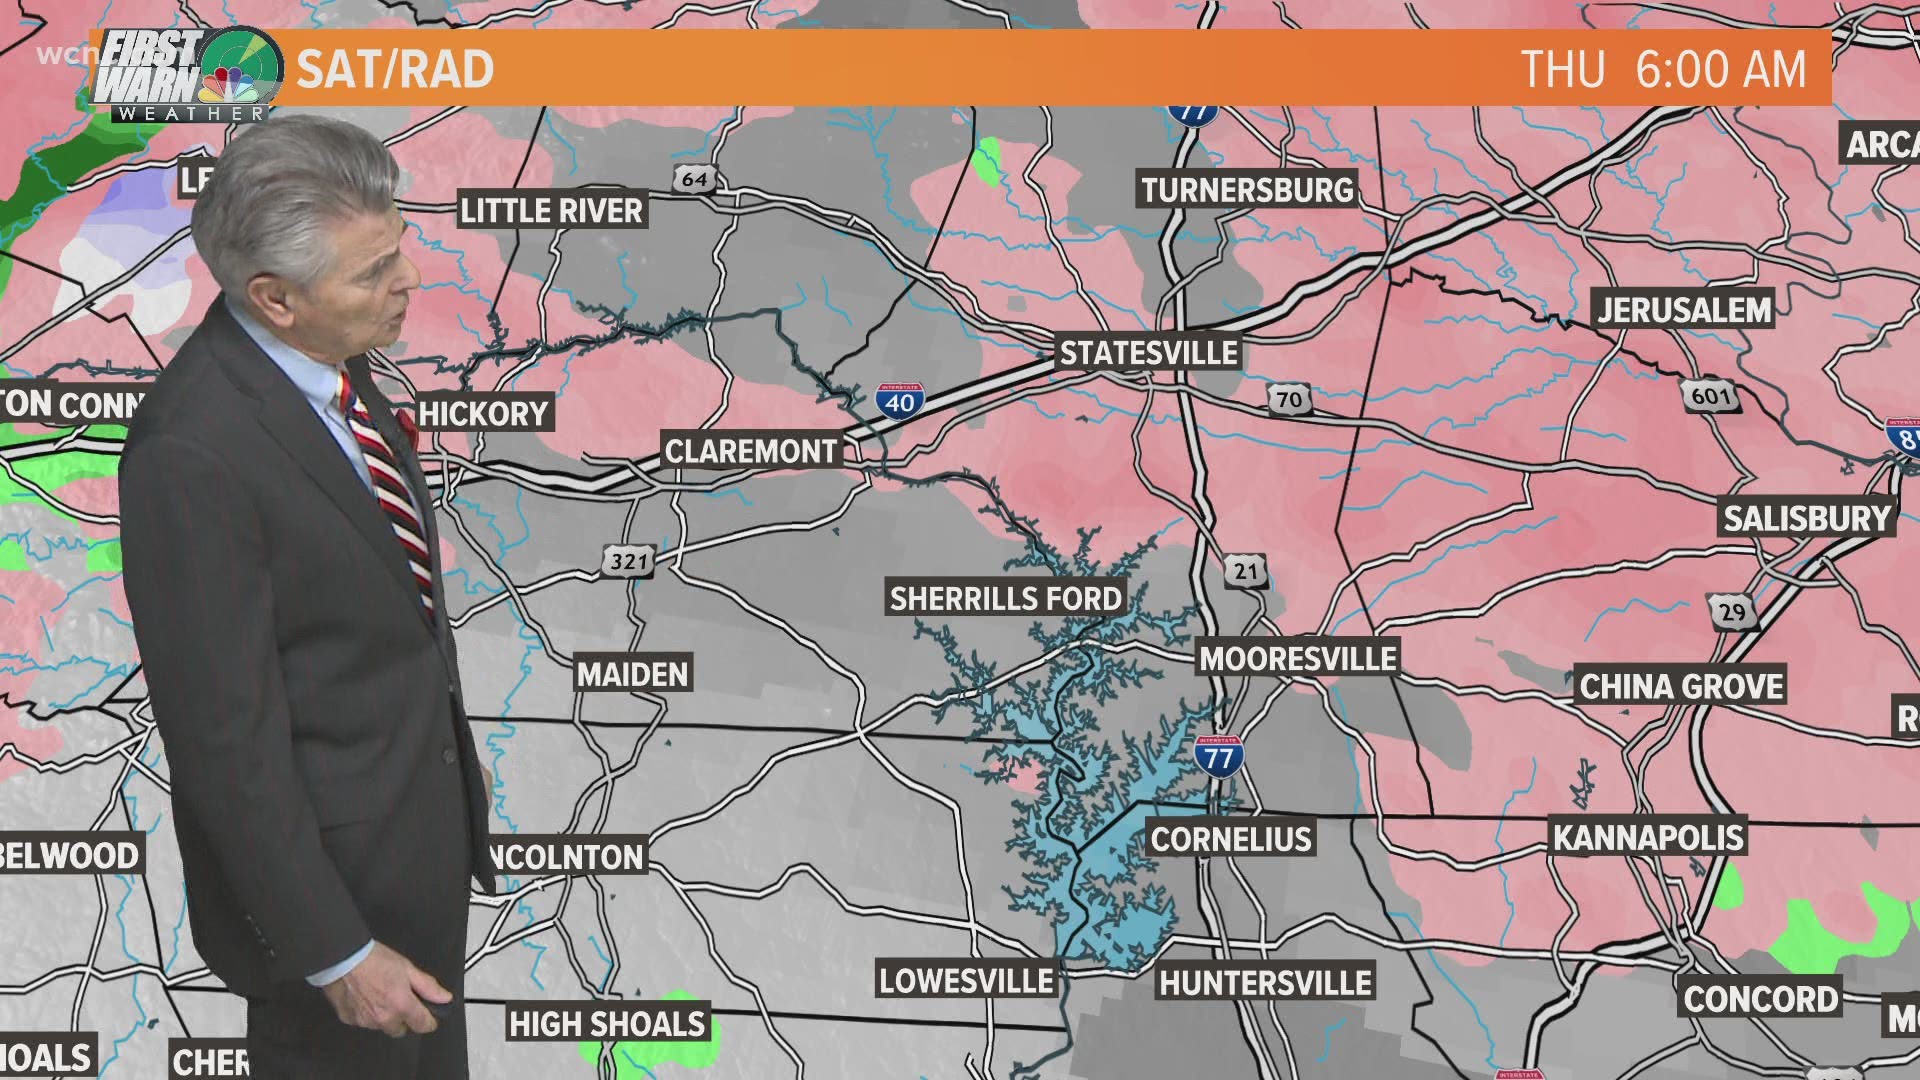 Winter Storm Warnings are in effect as a storm system brings freezing rain, ice and rain to the Charlotte region Thursday morning.